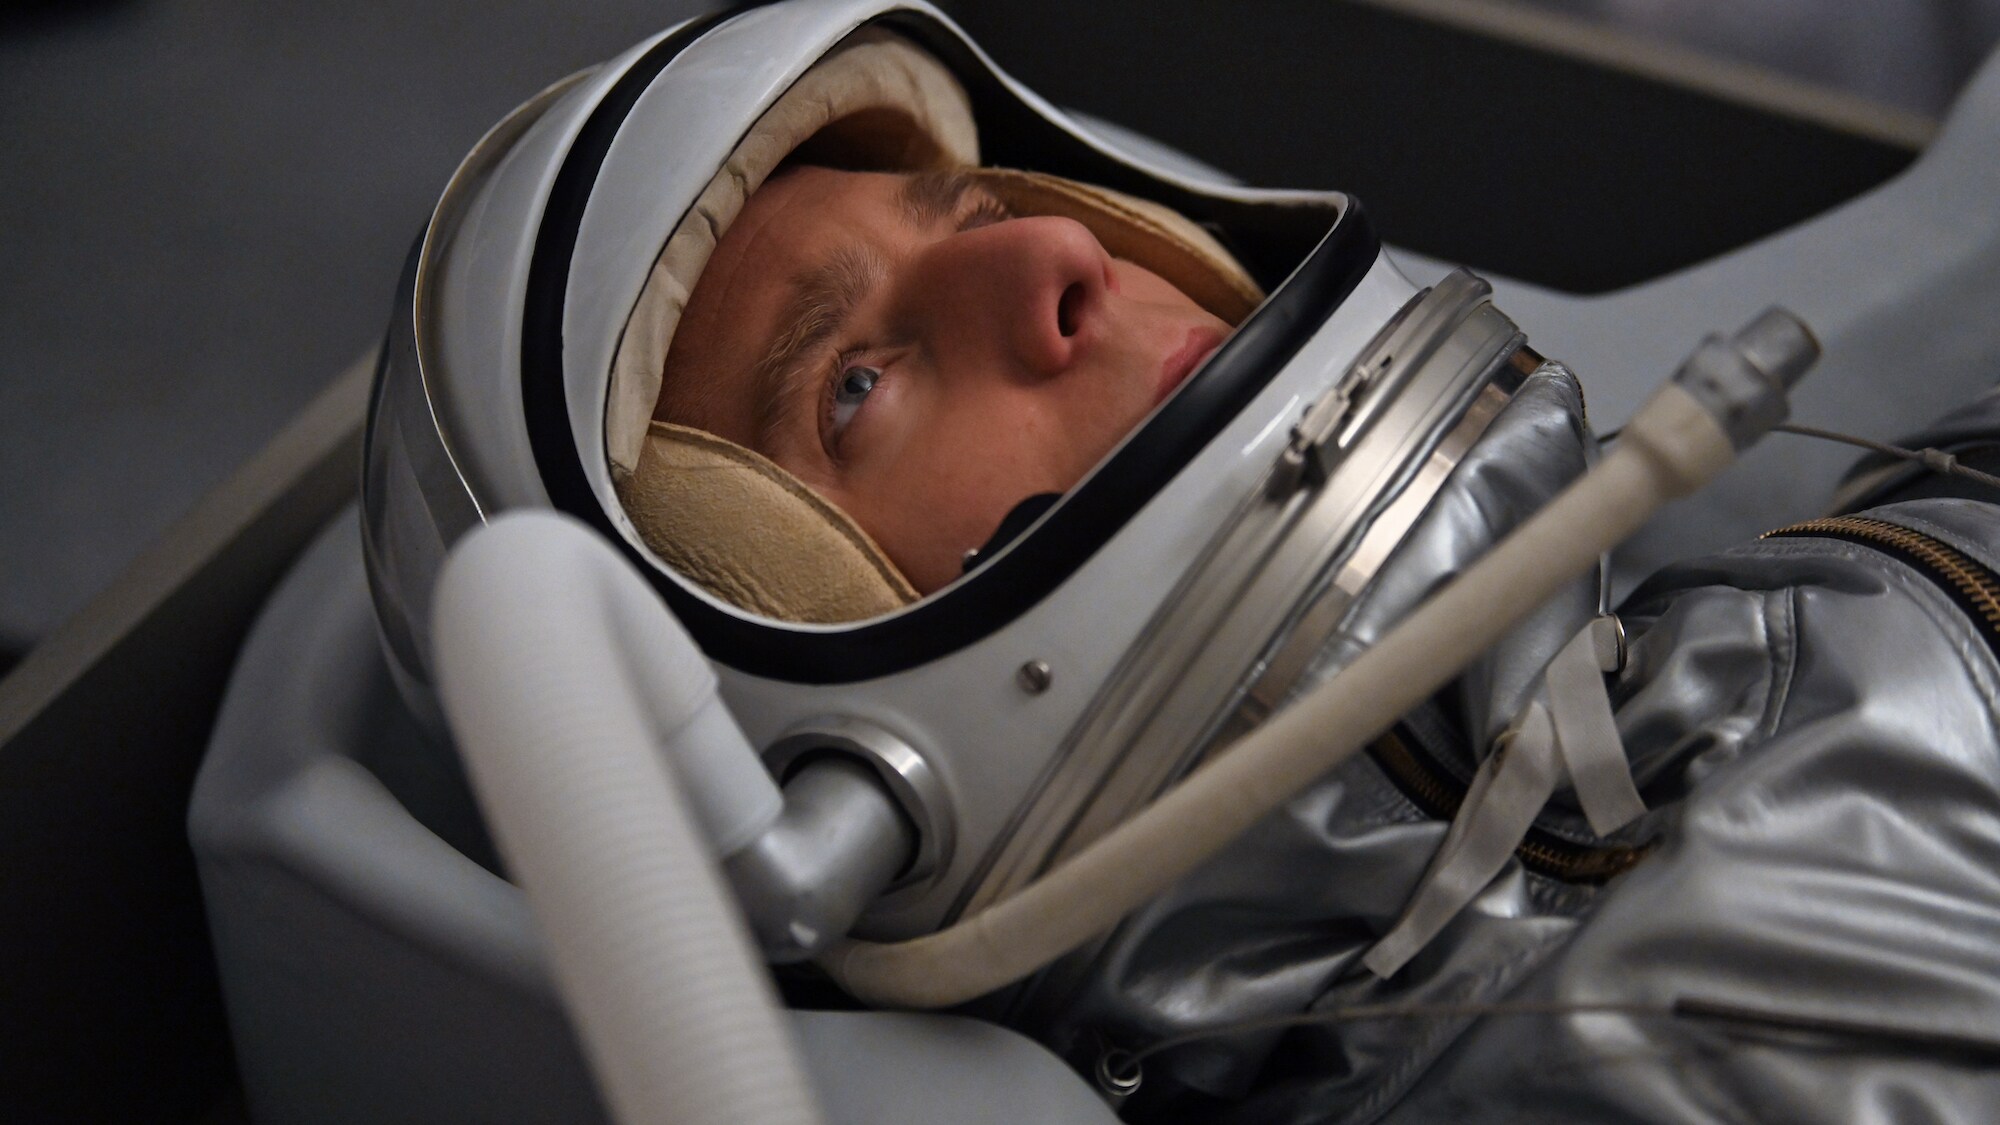 Alan Shepard, played by Jake McDorman, in space suit in National Geographic's THE RIGHT STUFF streaming on Disney+. (National Geographic/Gene Page)